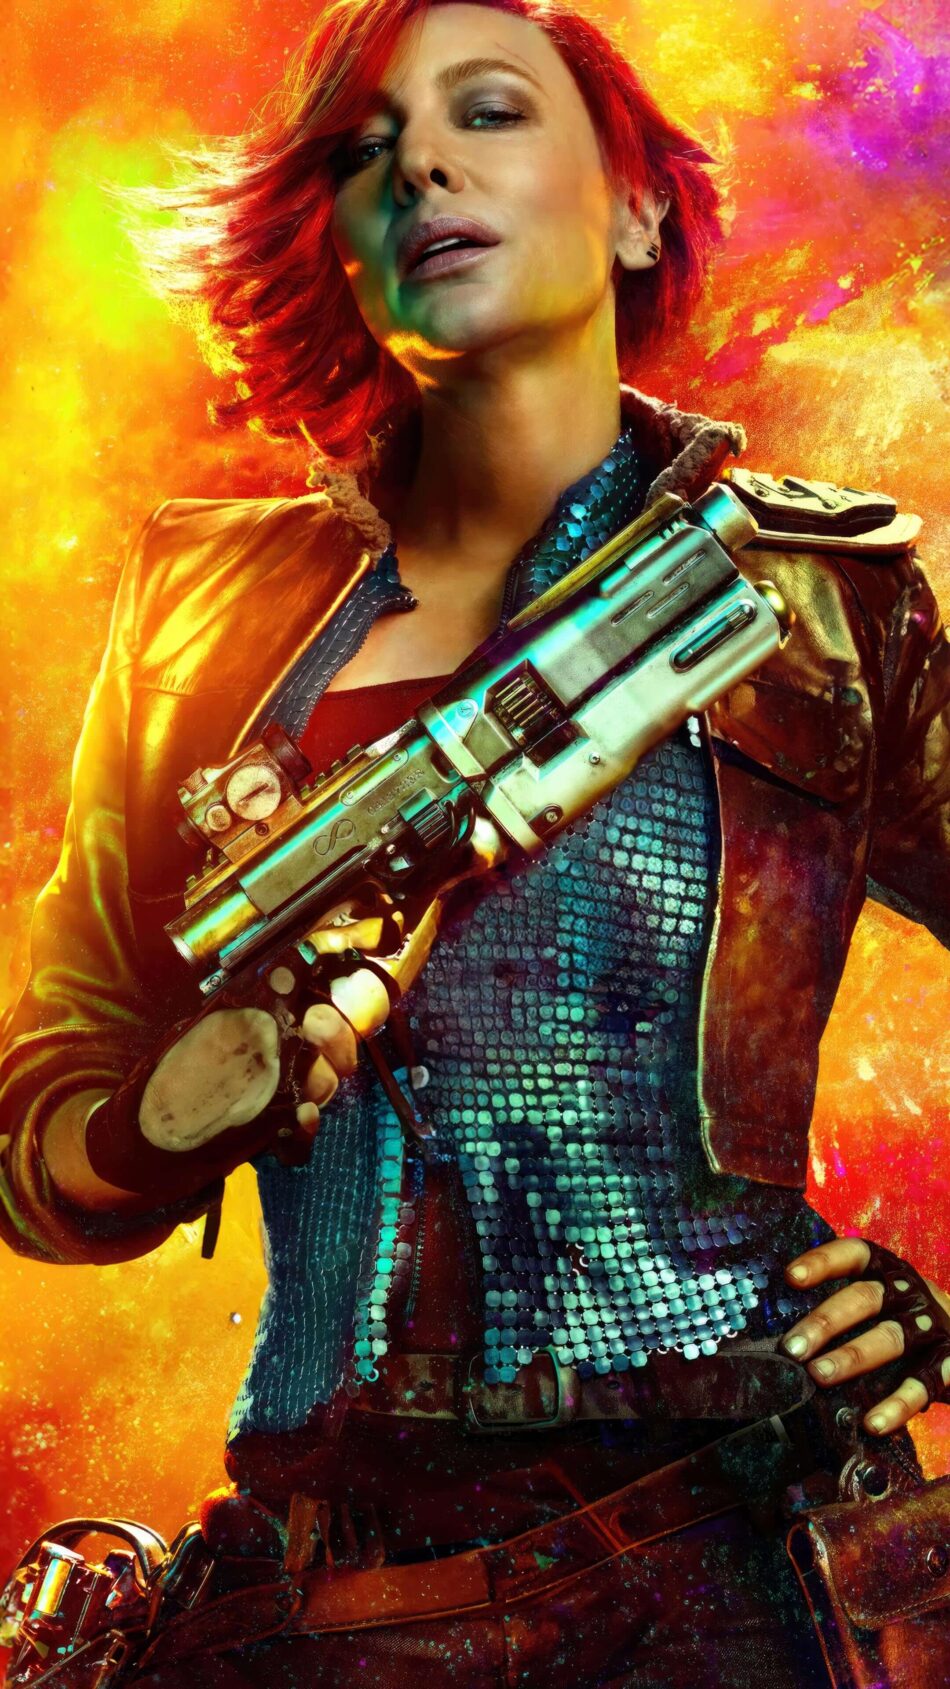 Cate Blanchett As Lilith In Borderlands Movie 4K Ultra HD Mobile Wallpaper